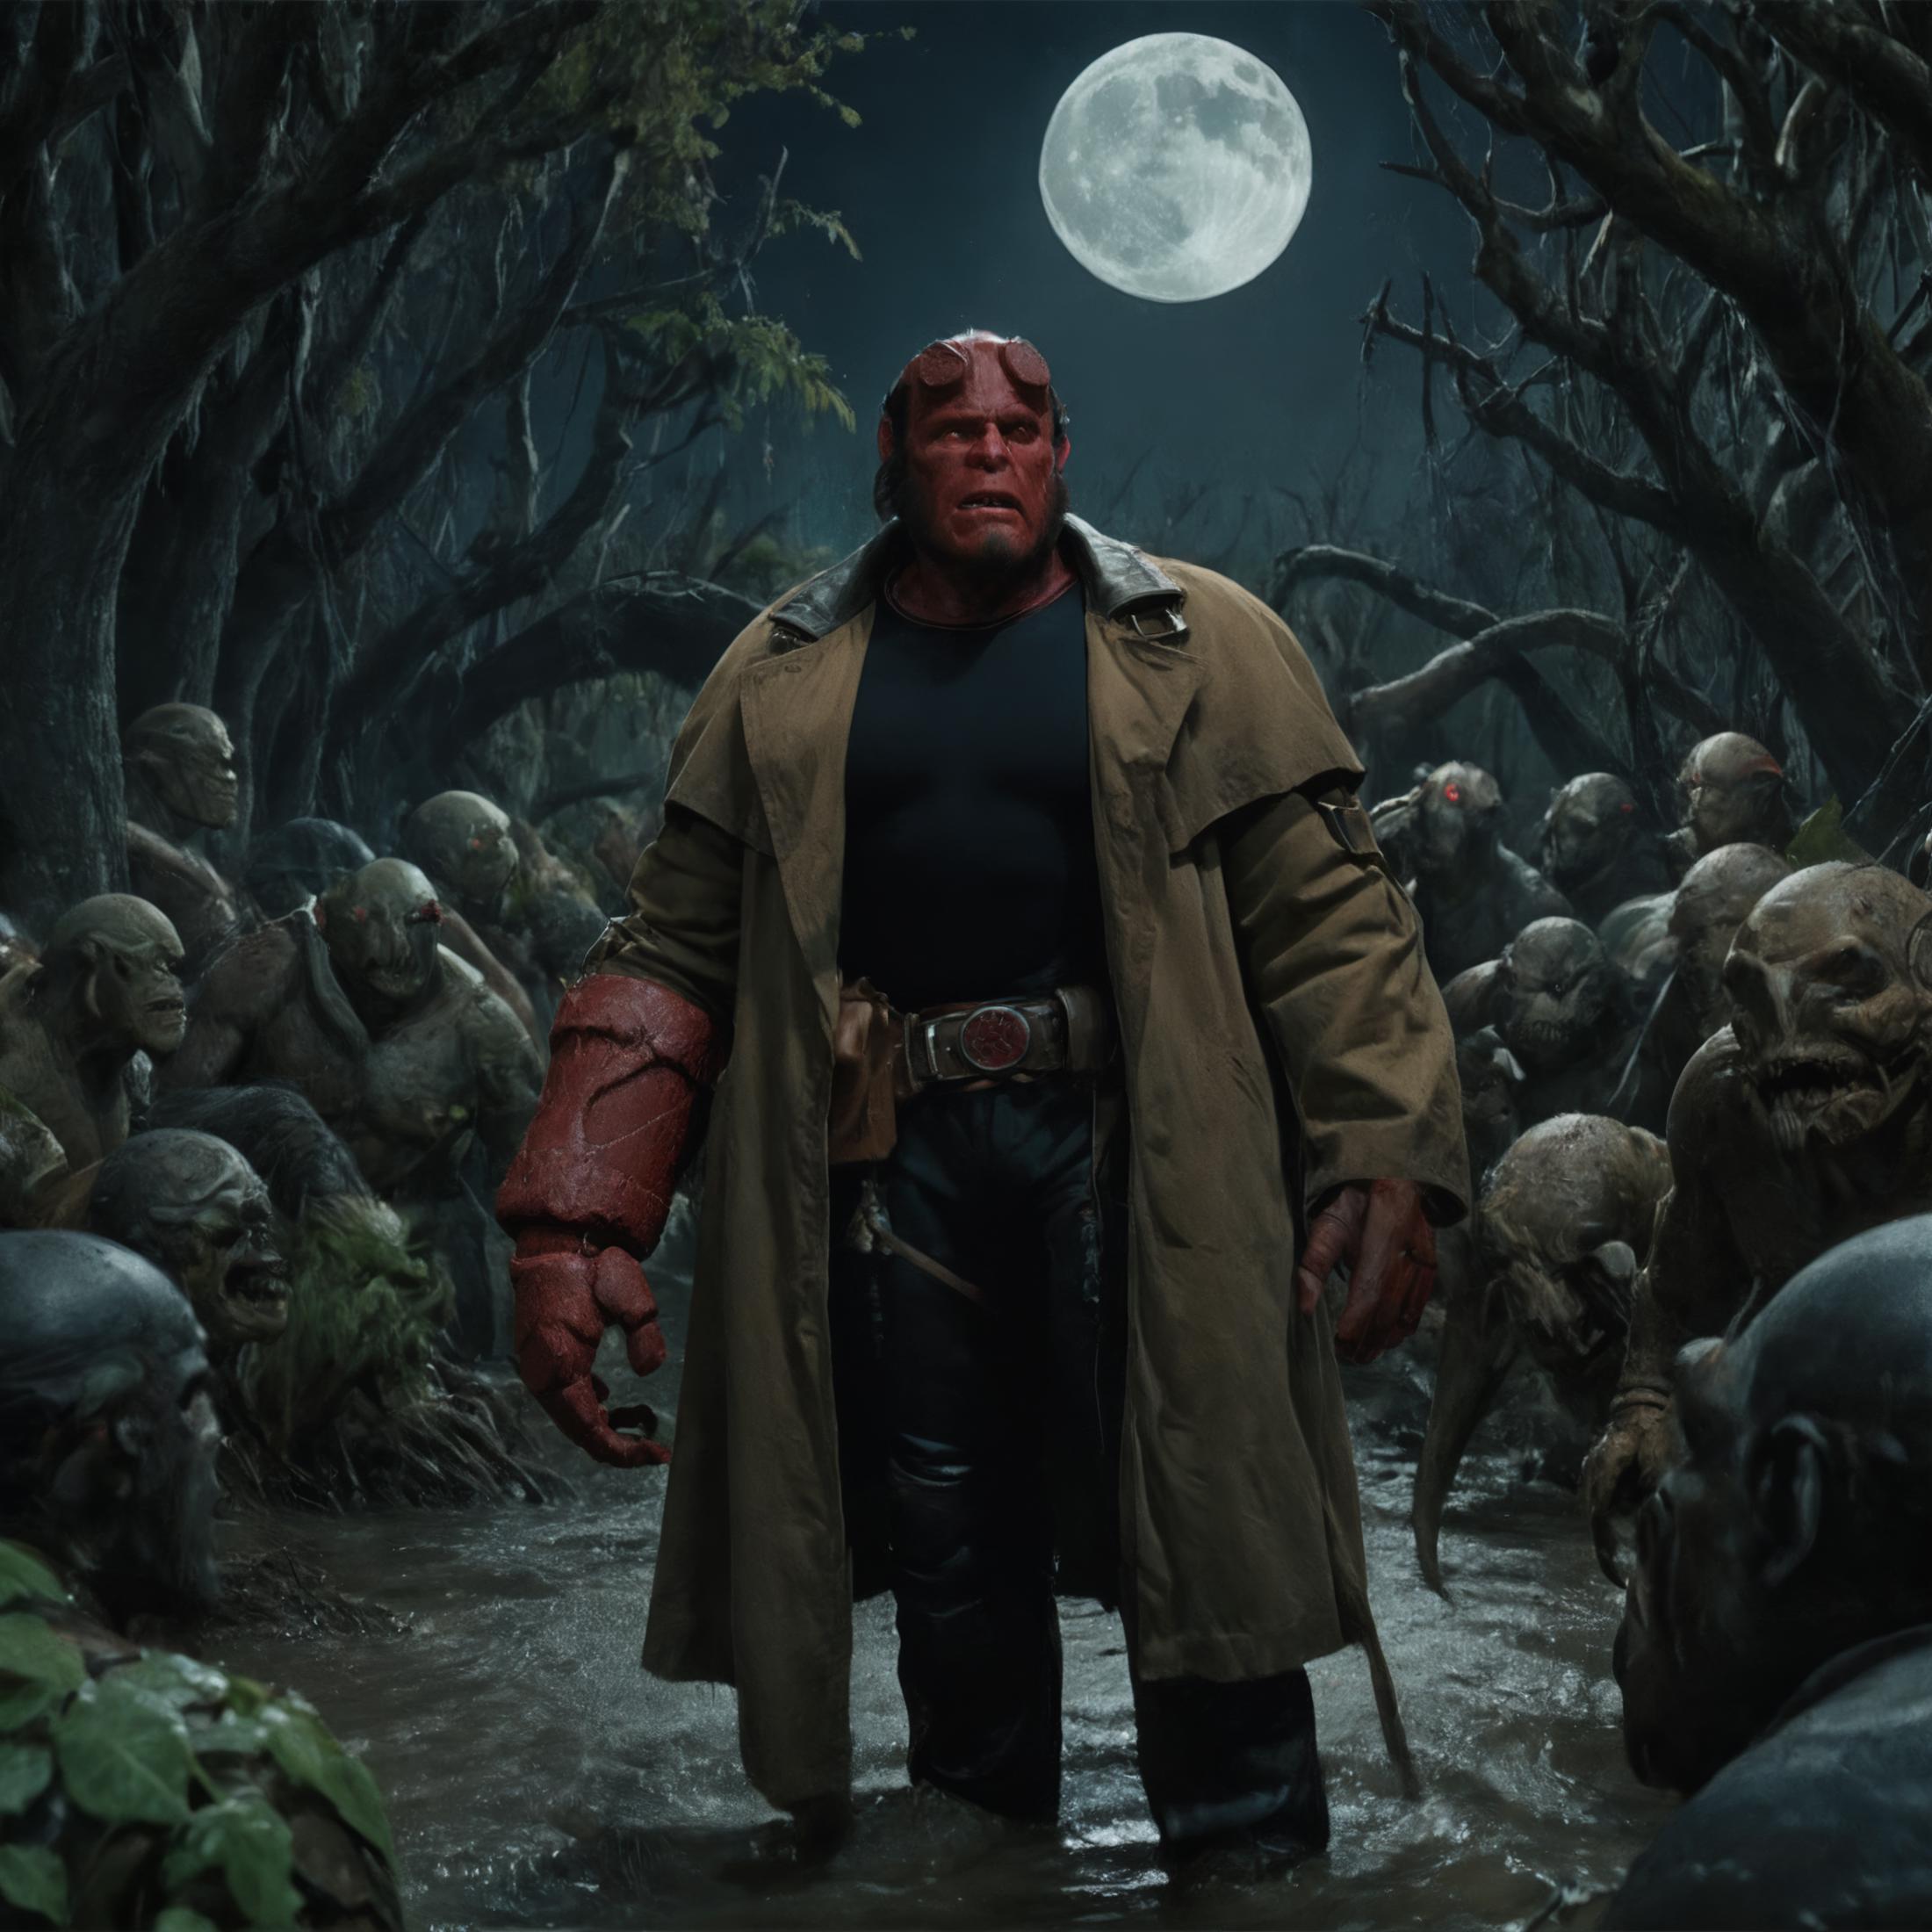 Ron Perlman Hellboy image by thesilvermoth